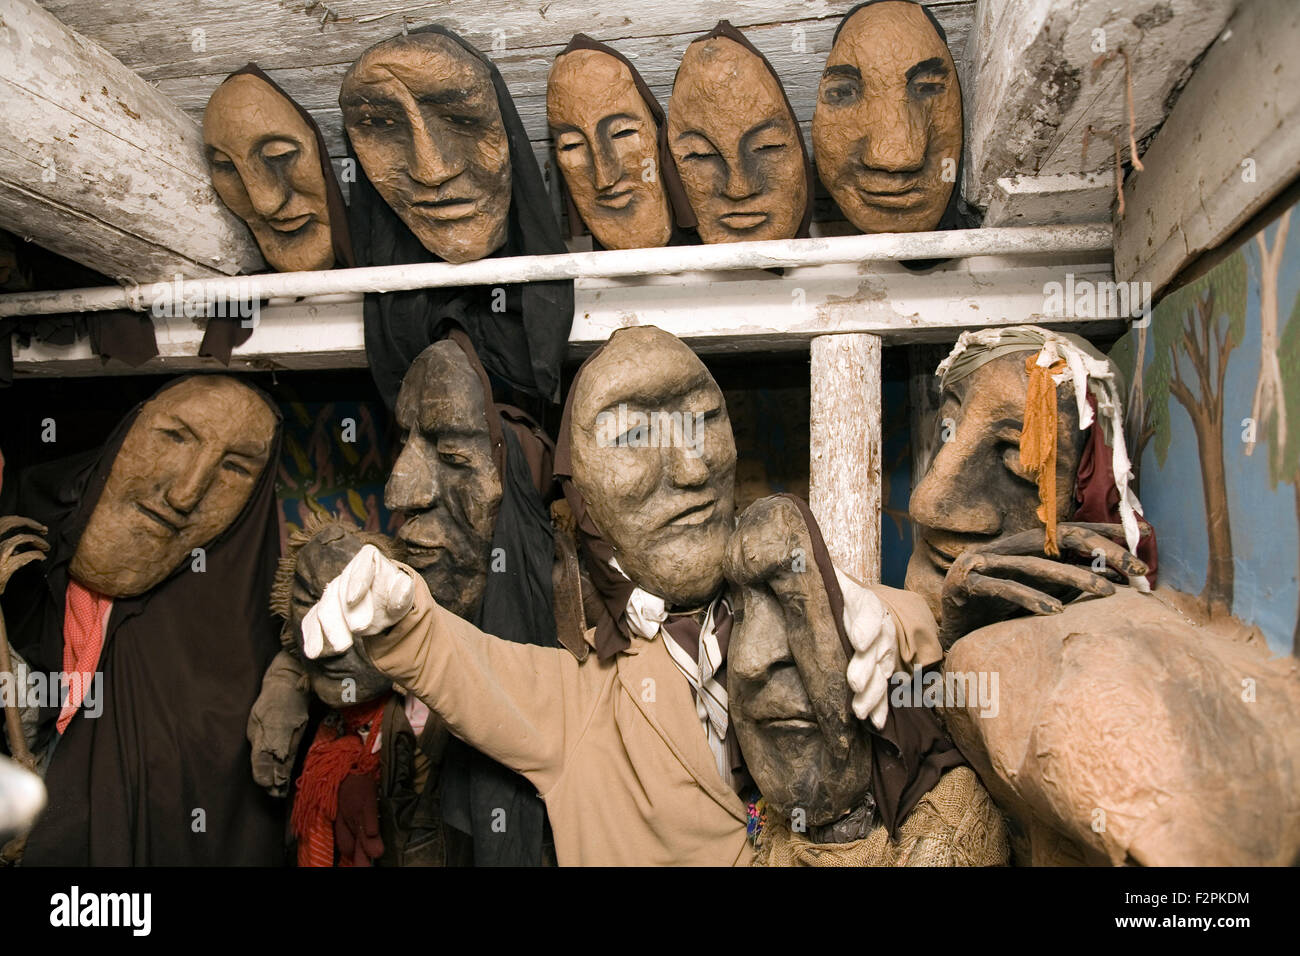 Puppets at the Bread and Puppet Museum, near Glover, Vermont, USA Stock Photo